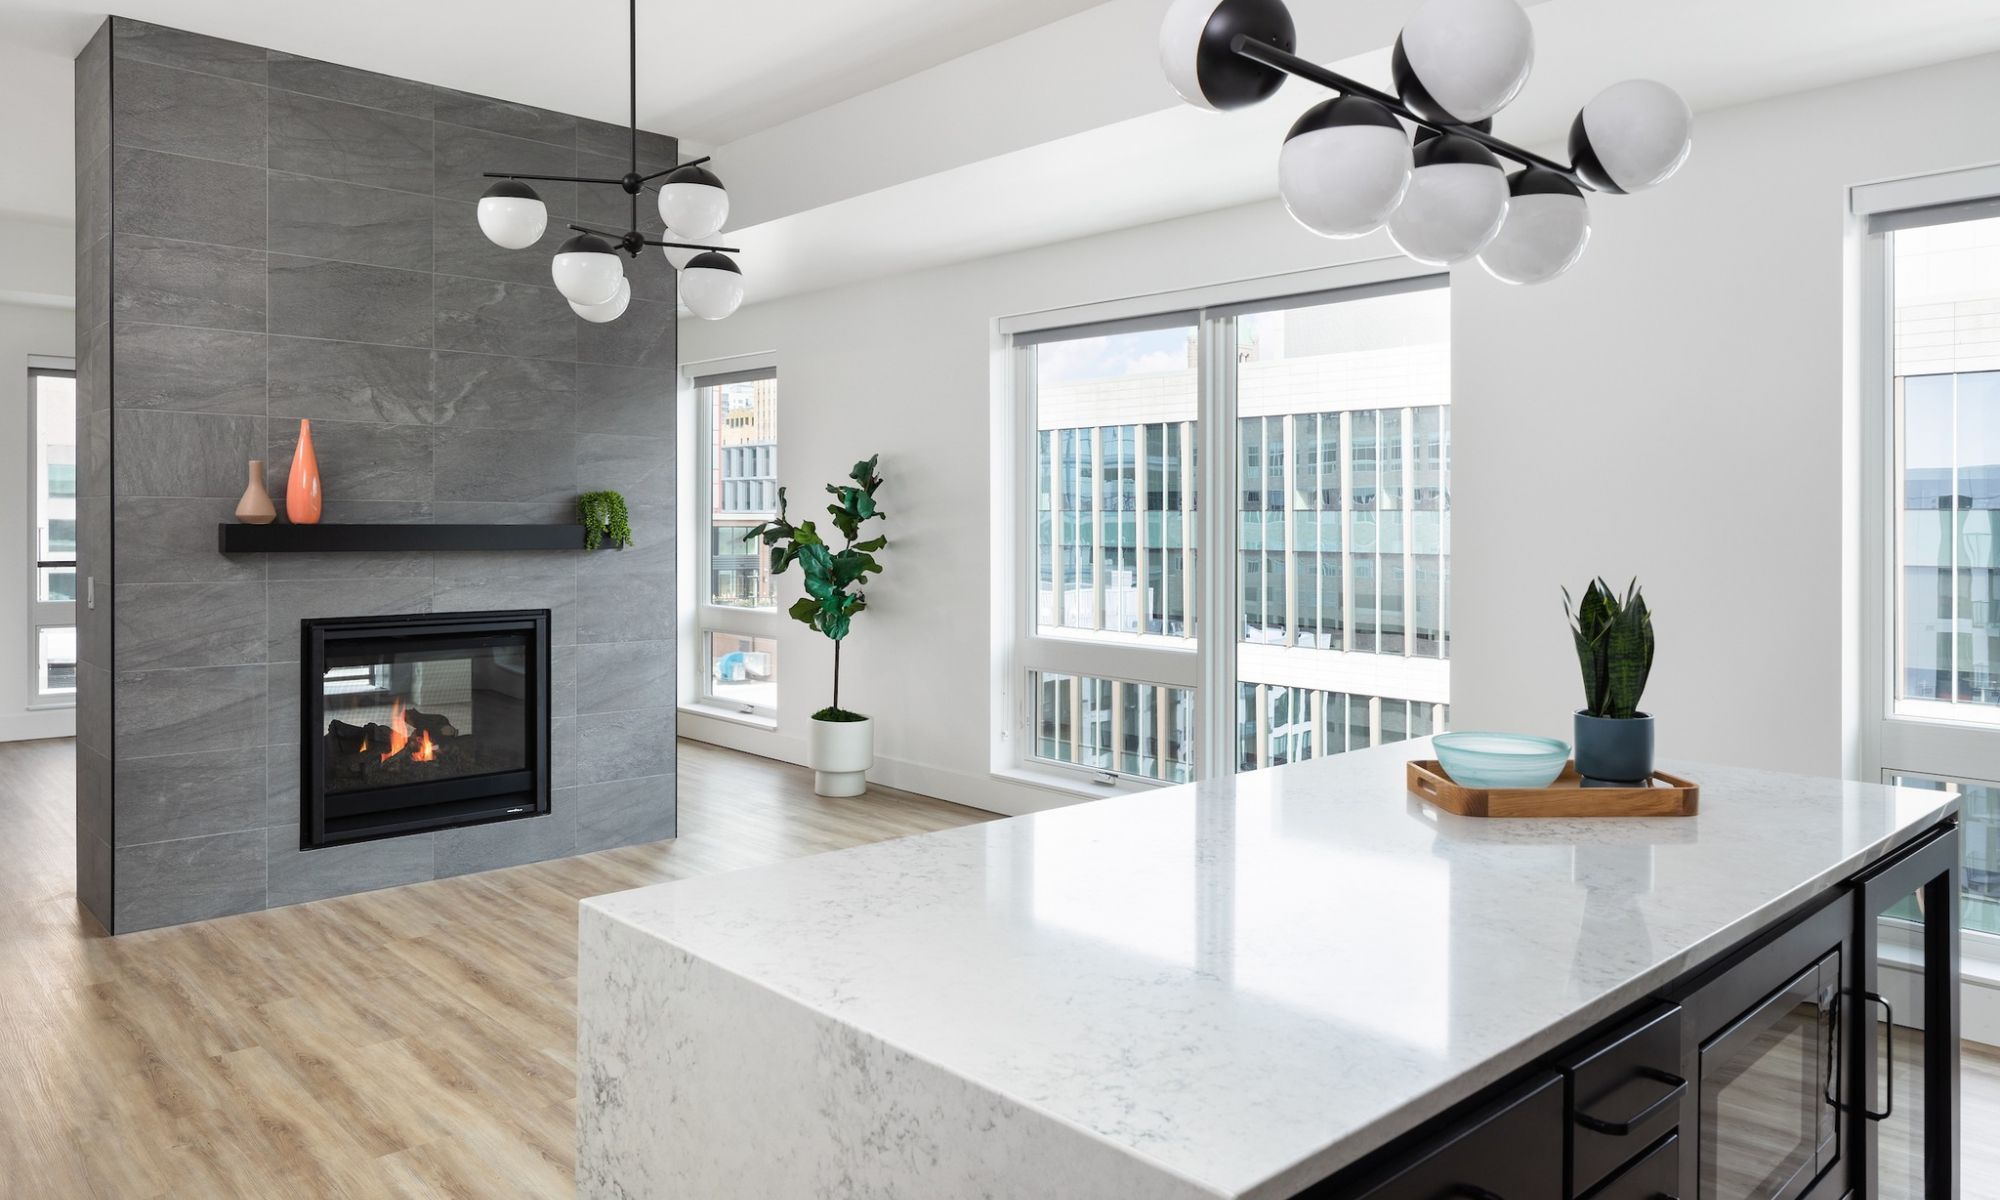 Moment luxury apartments penthouse apartment showing double-sided fireplace and kitchen island